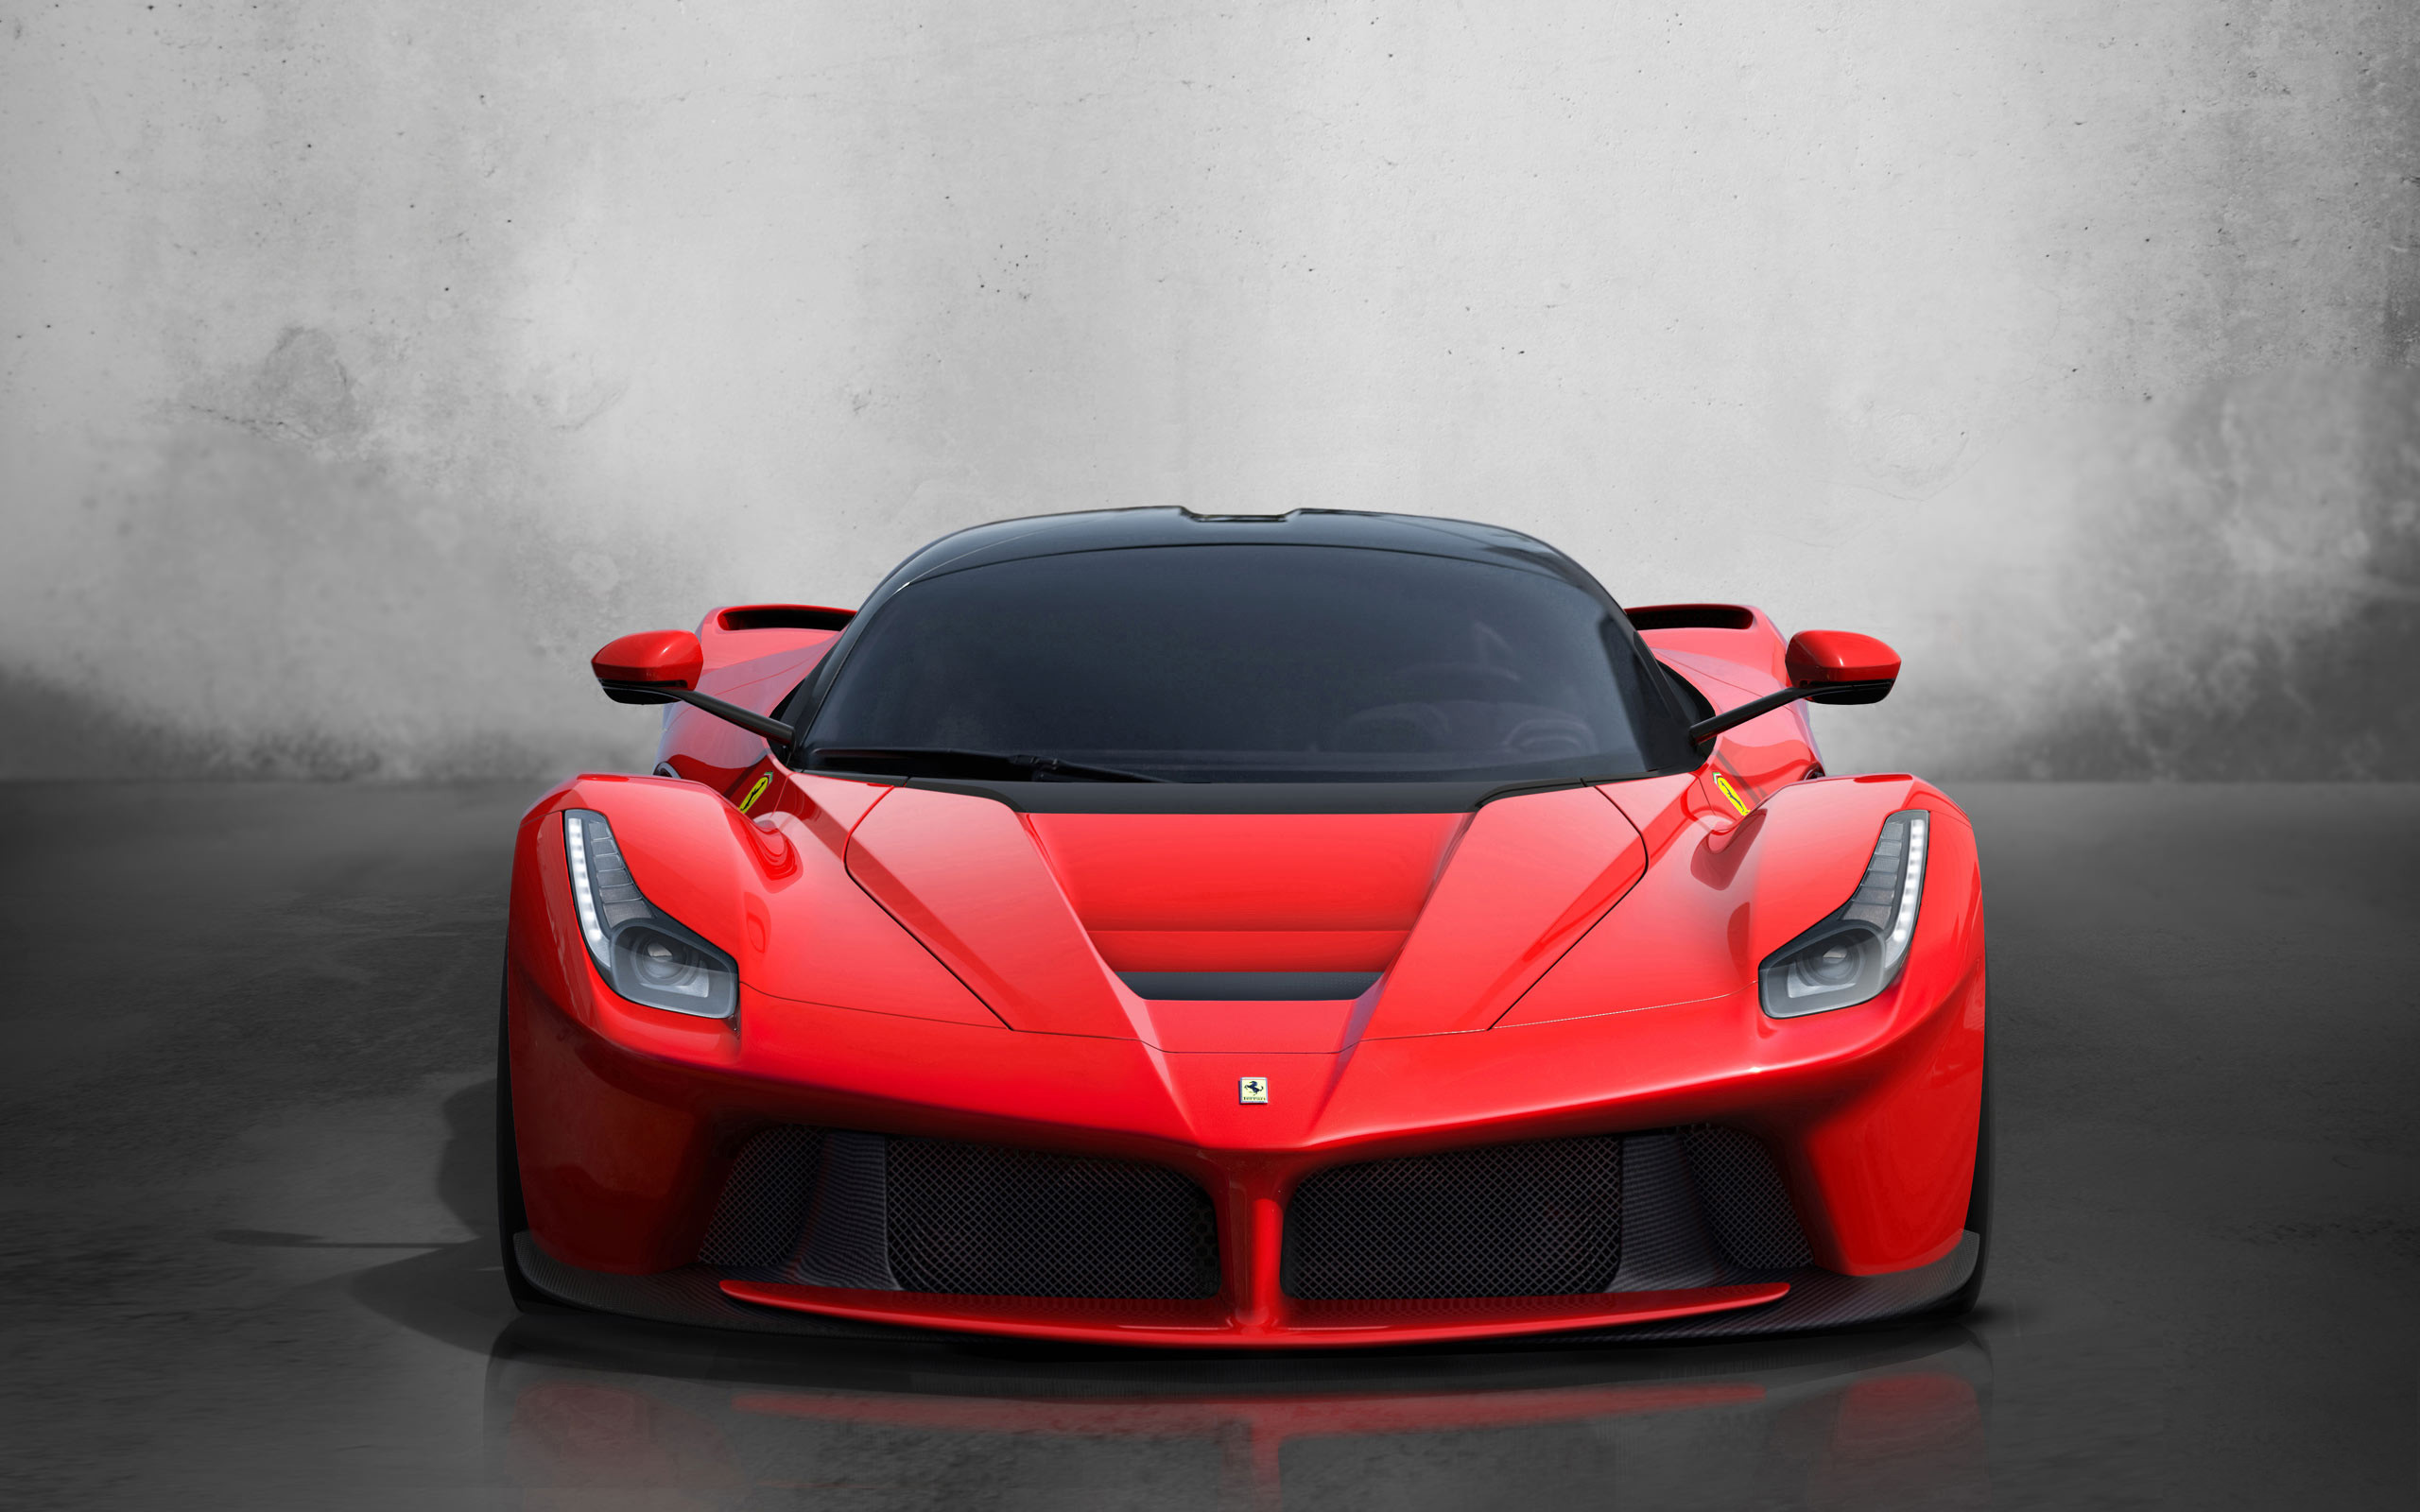 2560x1600 ... pictures of cool cars wallpapers 75 wallpapers hd wallpapers ...